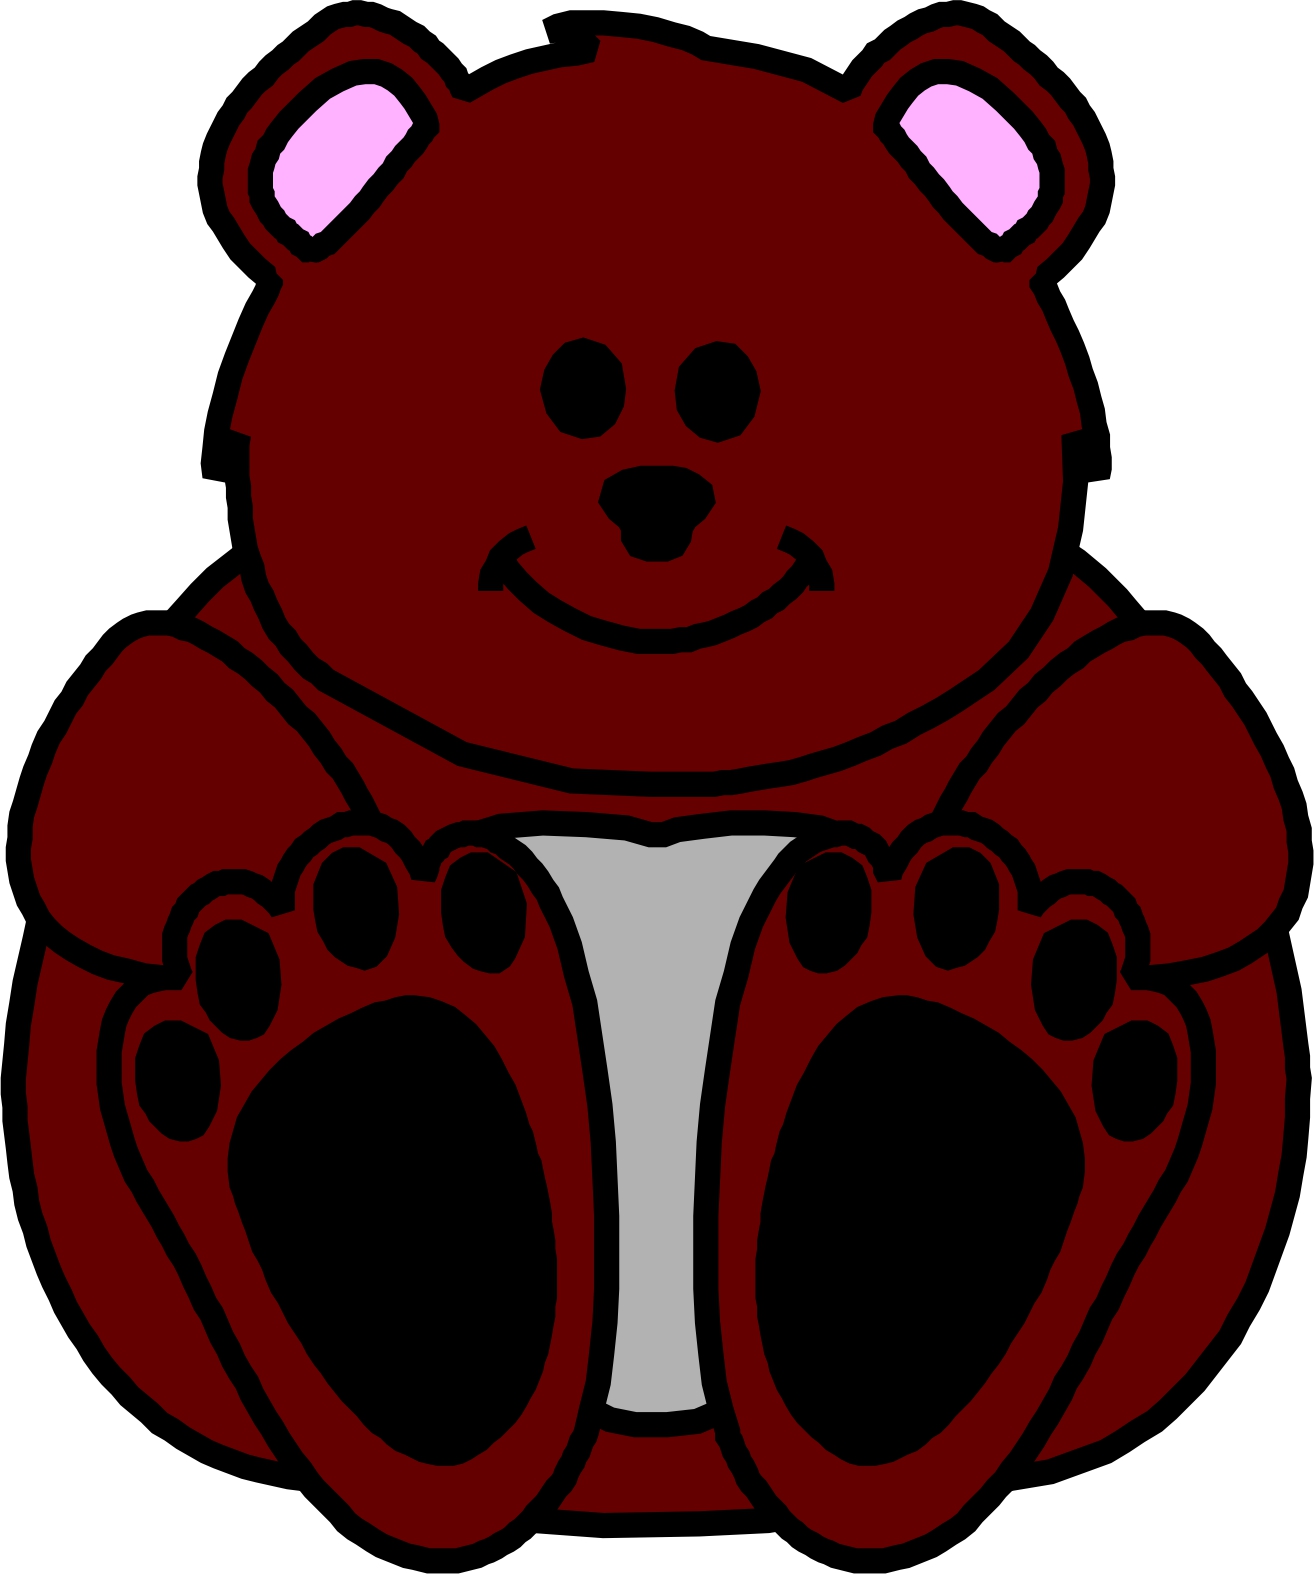 free-pictures-of-cartoon-bears-download-free-pictures-of-cartoon-bears